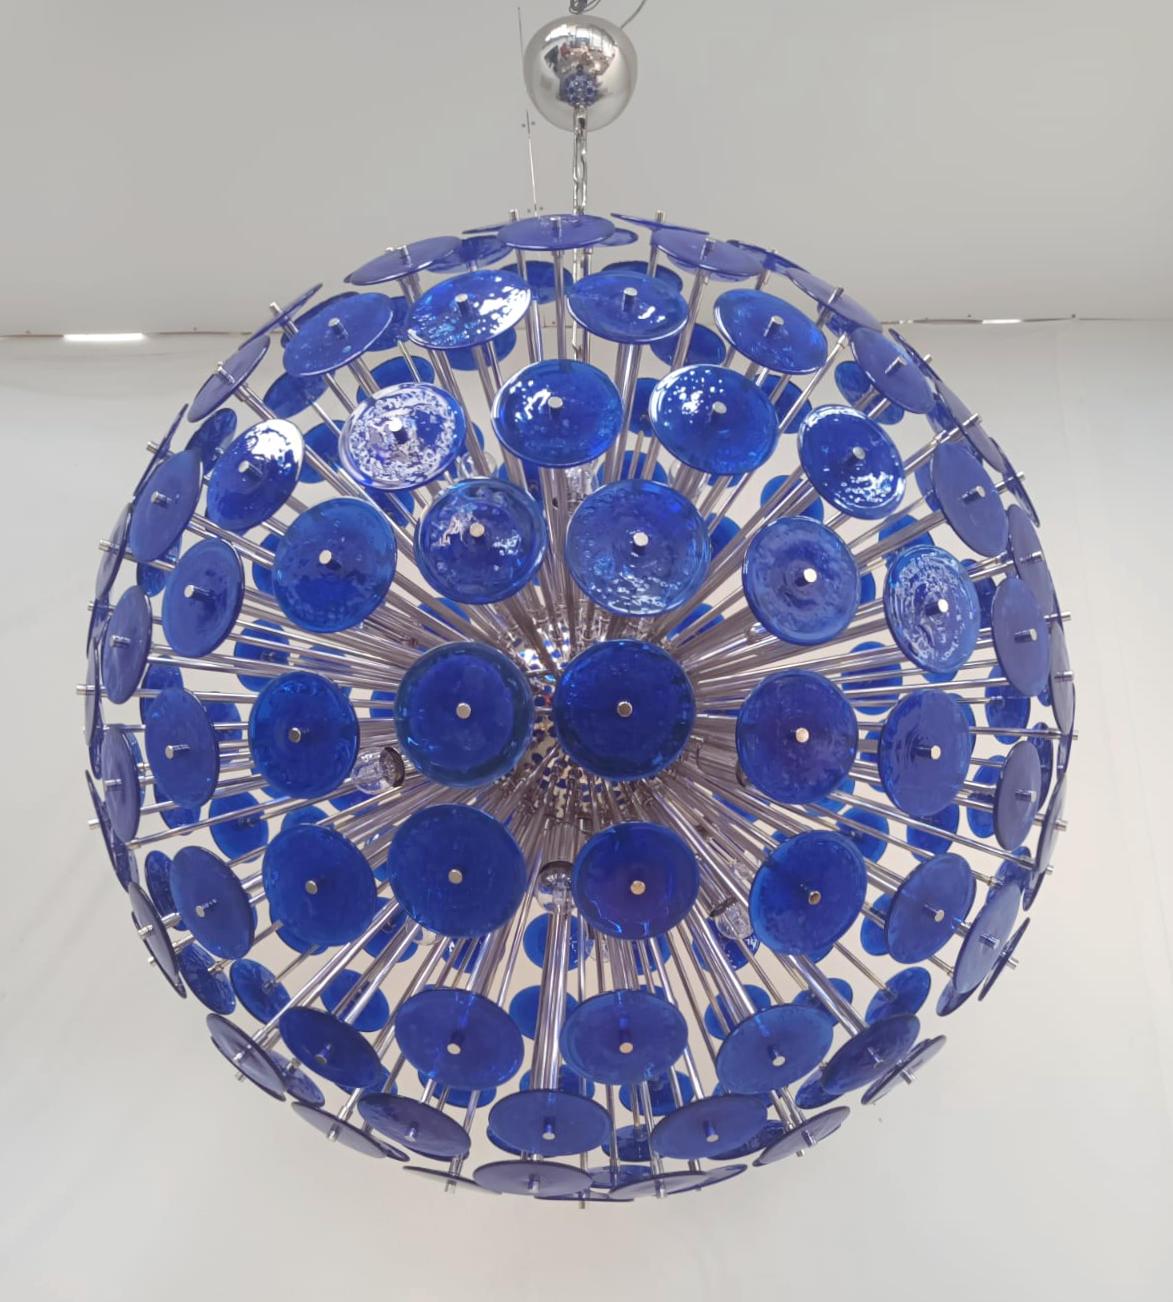 Italian round sputnik chandelier with blue Murano glass discs hand blown with bubbles using Pulegoso technique, mounted on chrome plated metal frame by Fabio Ltd / Made in Italy
Measures: Diameter 43.5 inches, height 43.5 inches plus chain and